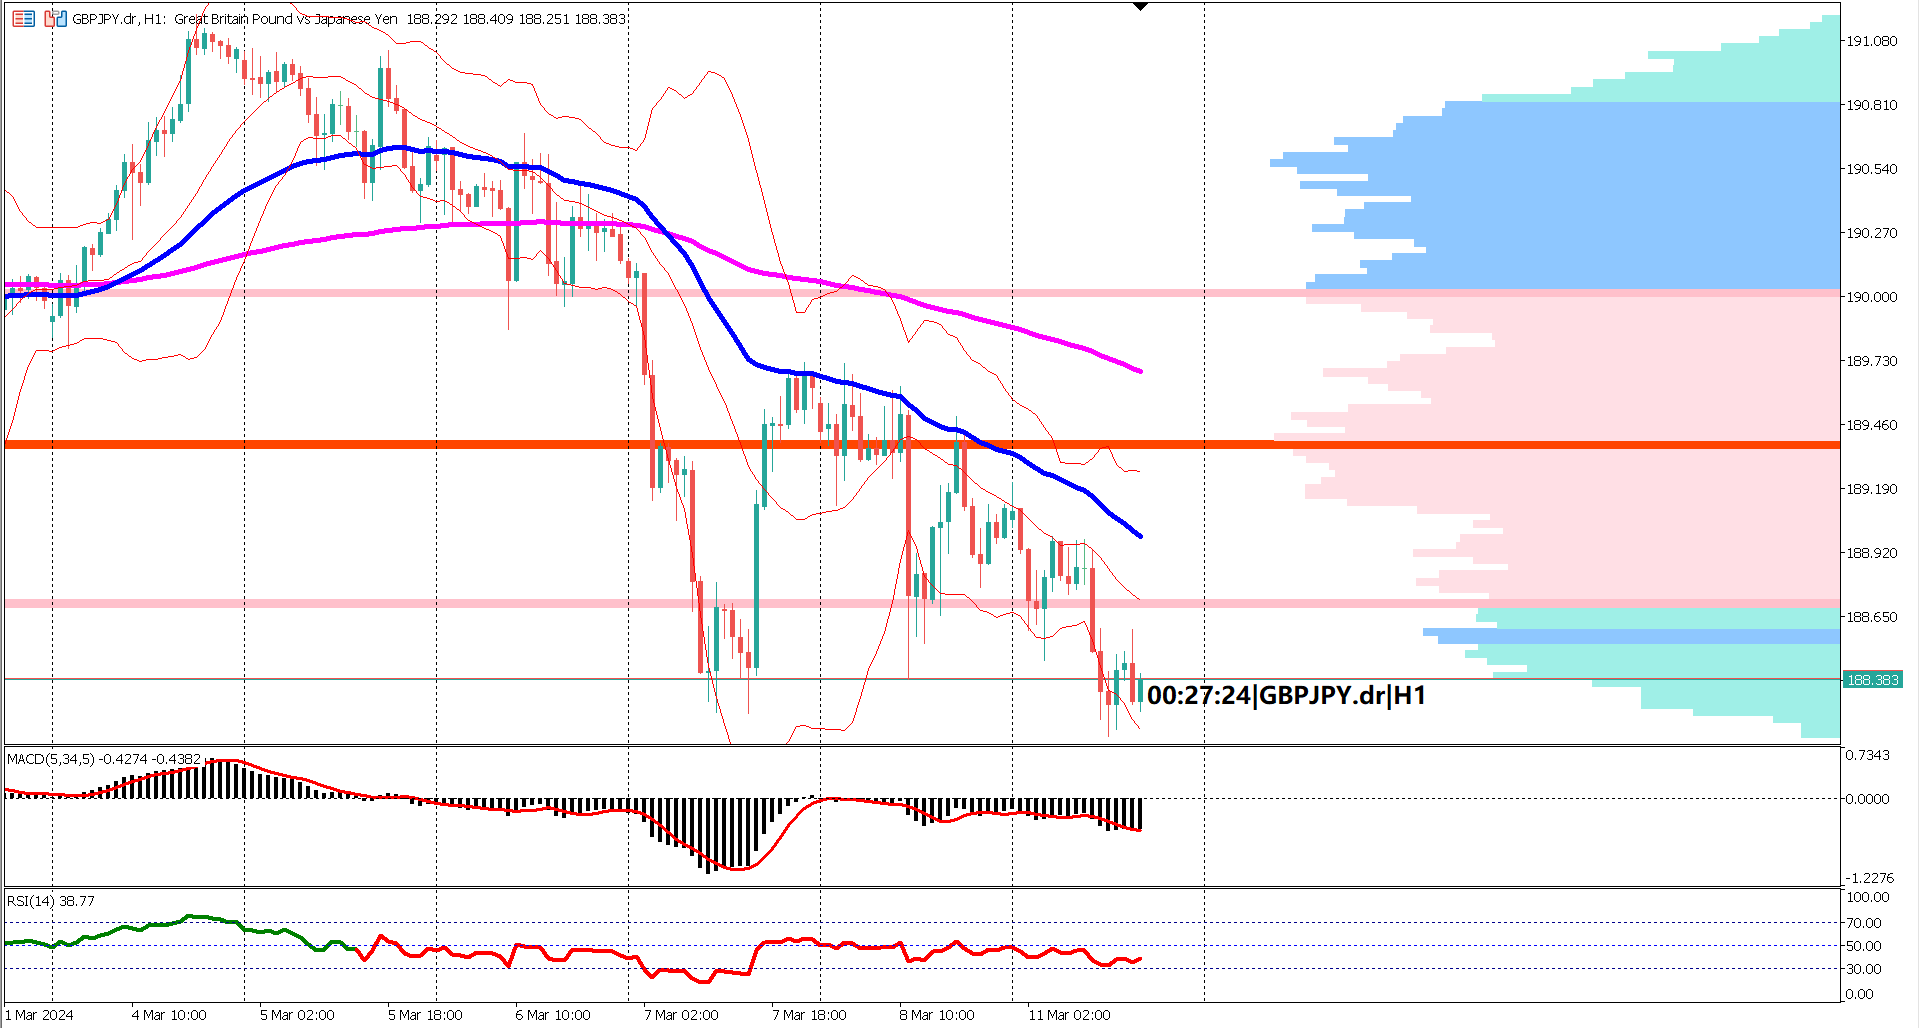 Technical Analysis Signals Strong Bearish Momentum for GBPJPY